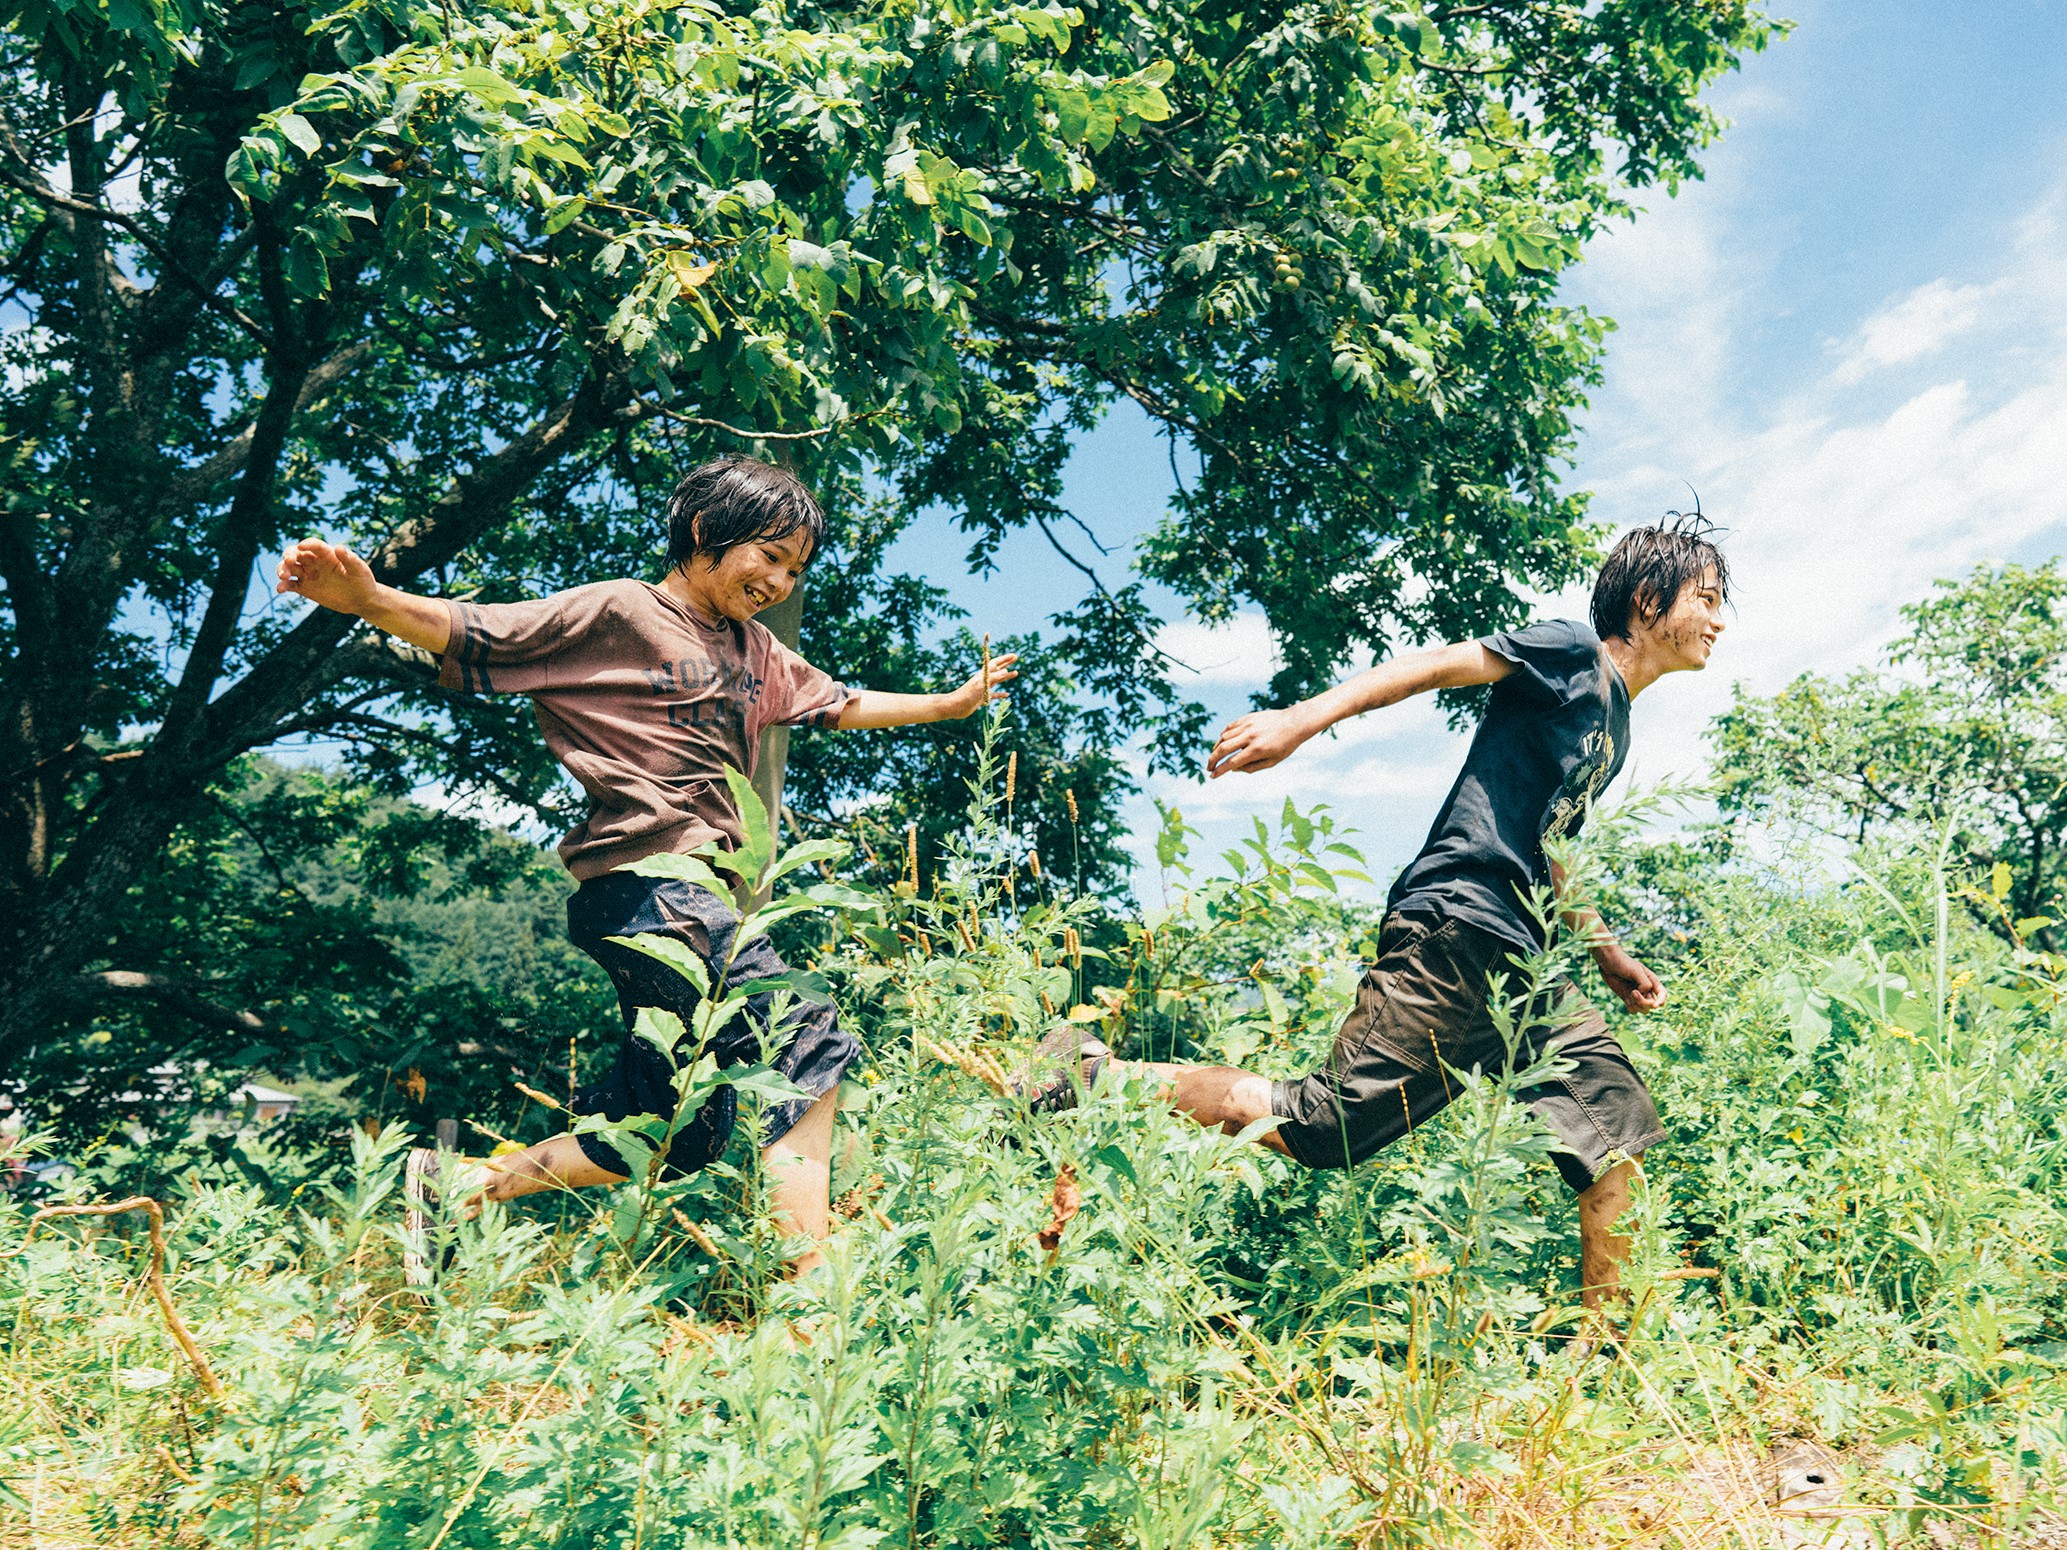 Two Japanese boys covered in mud run through the long grass smiling. Behind them is a large tree and a blue sky with wispy white clouds.